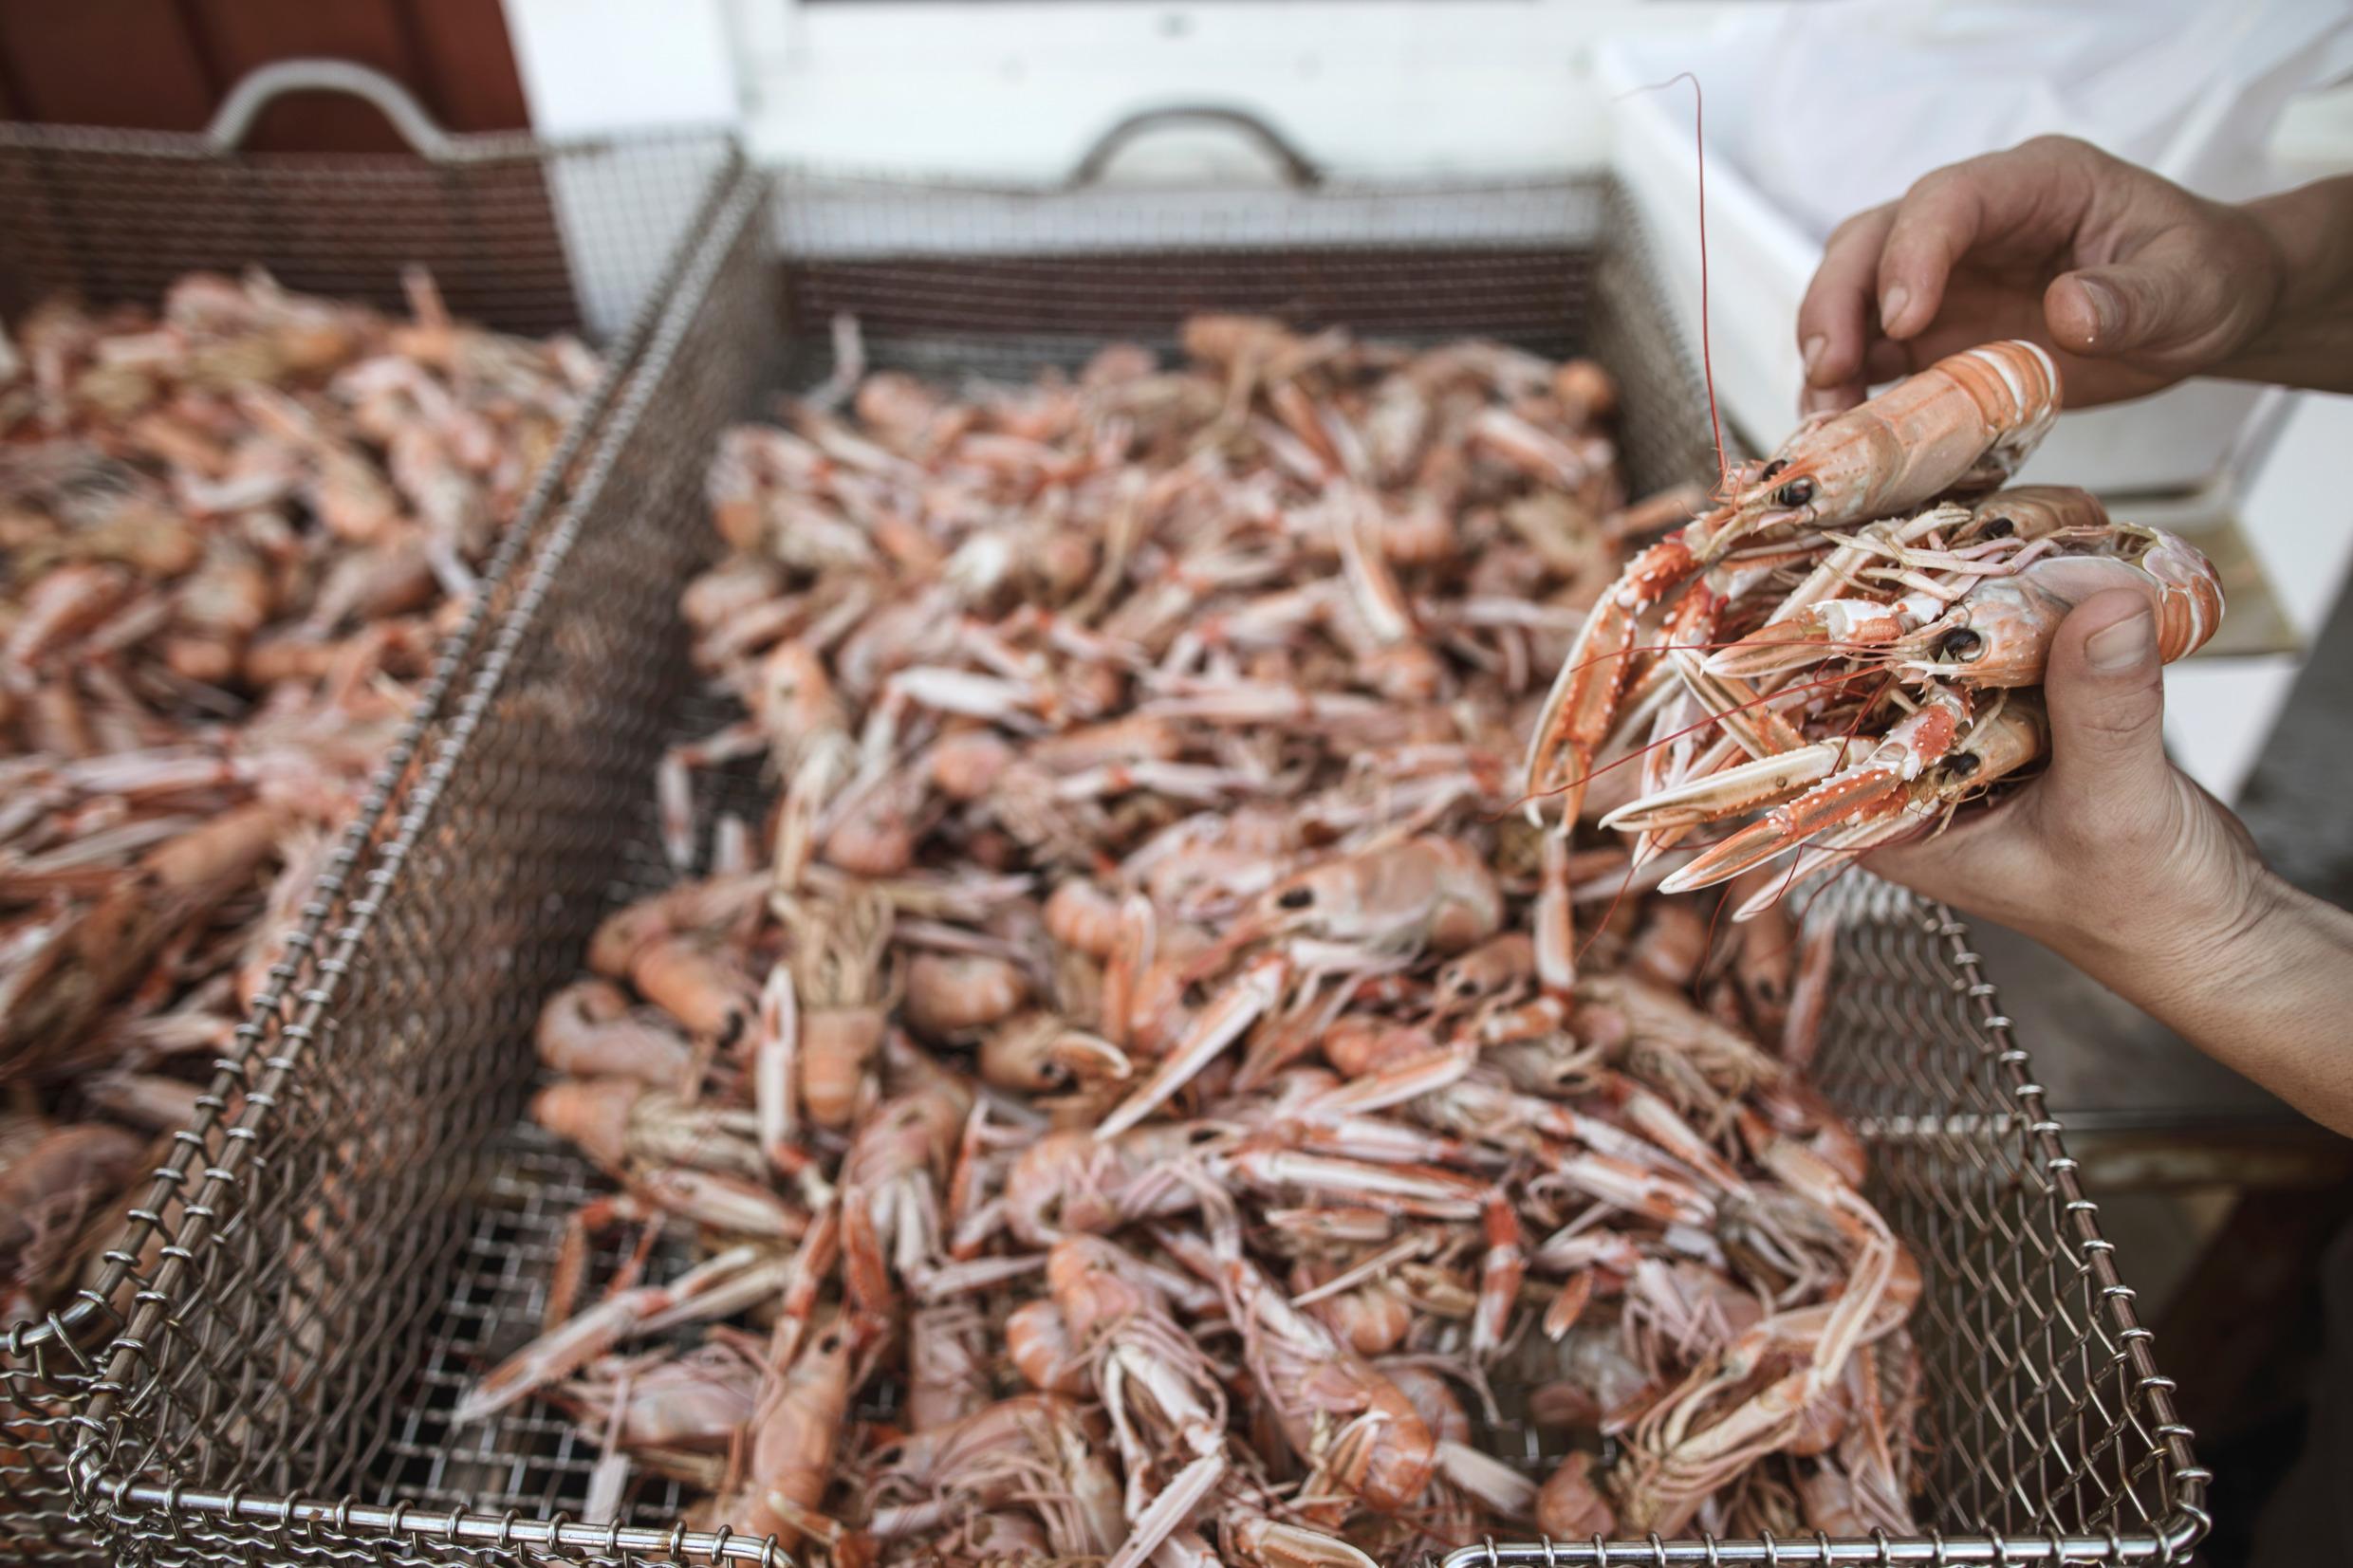 Langoustines, crayfish, is lying in a basket and you see that some hands picking up more seafood from the basket.